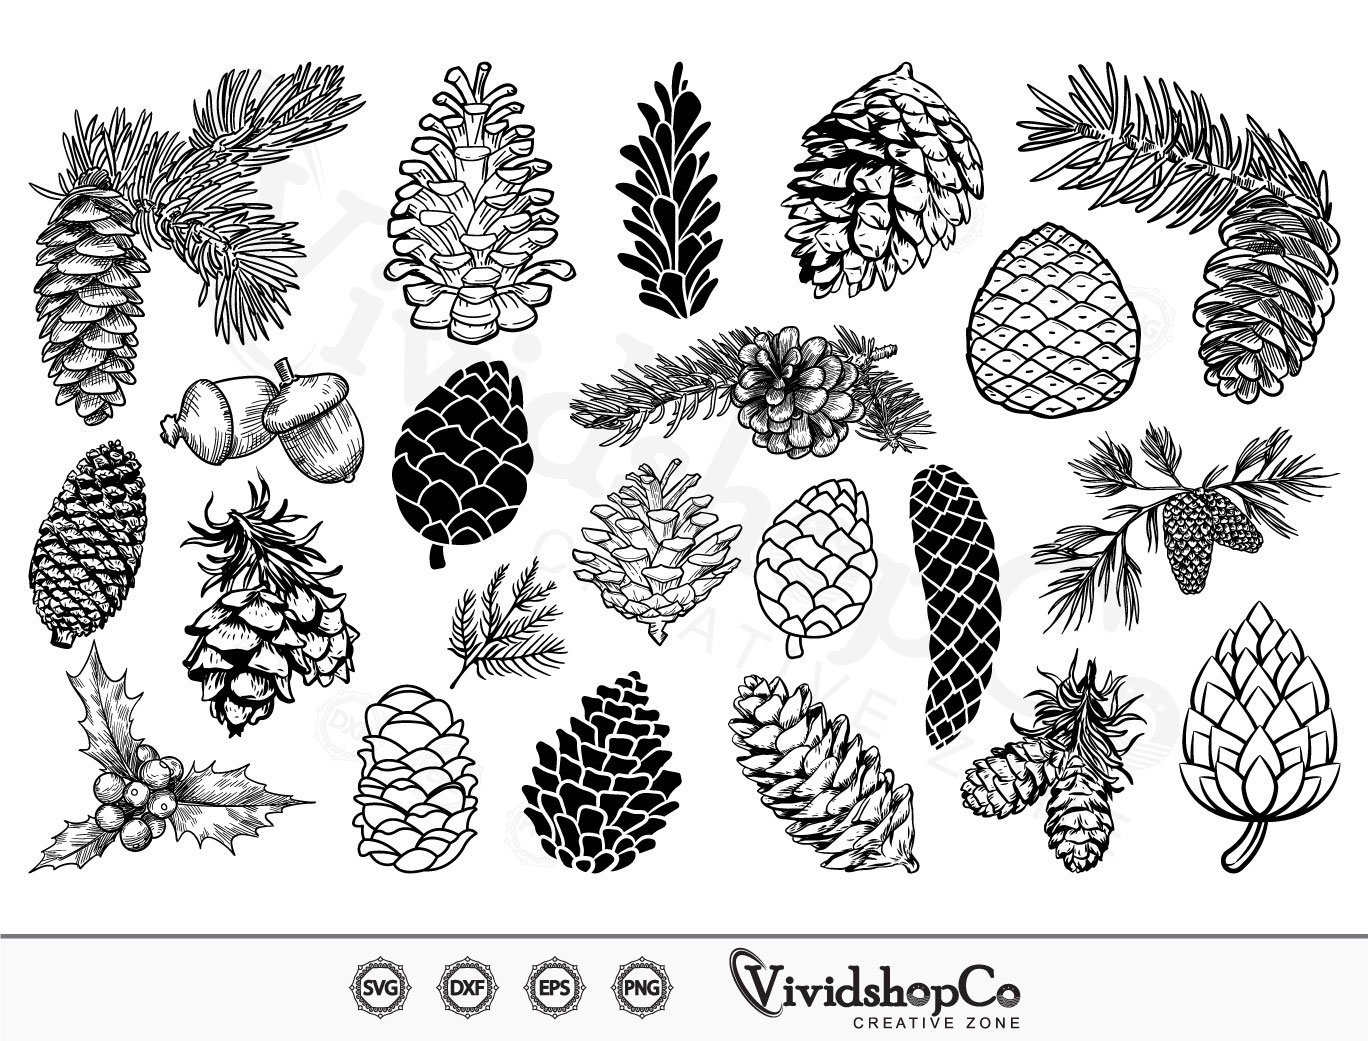 Pine Branch SVG, EPS, PNG Download, Pine Cone, Christmas Tree Clipart,  Christmas Decoration, Tree Branch Svg, Pine Cut File, Commercial Use 